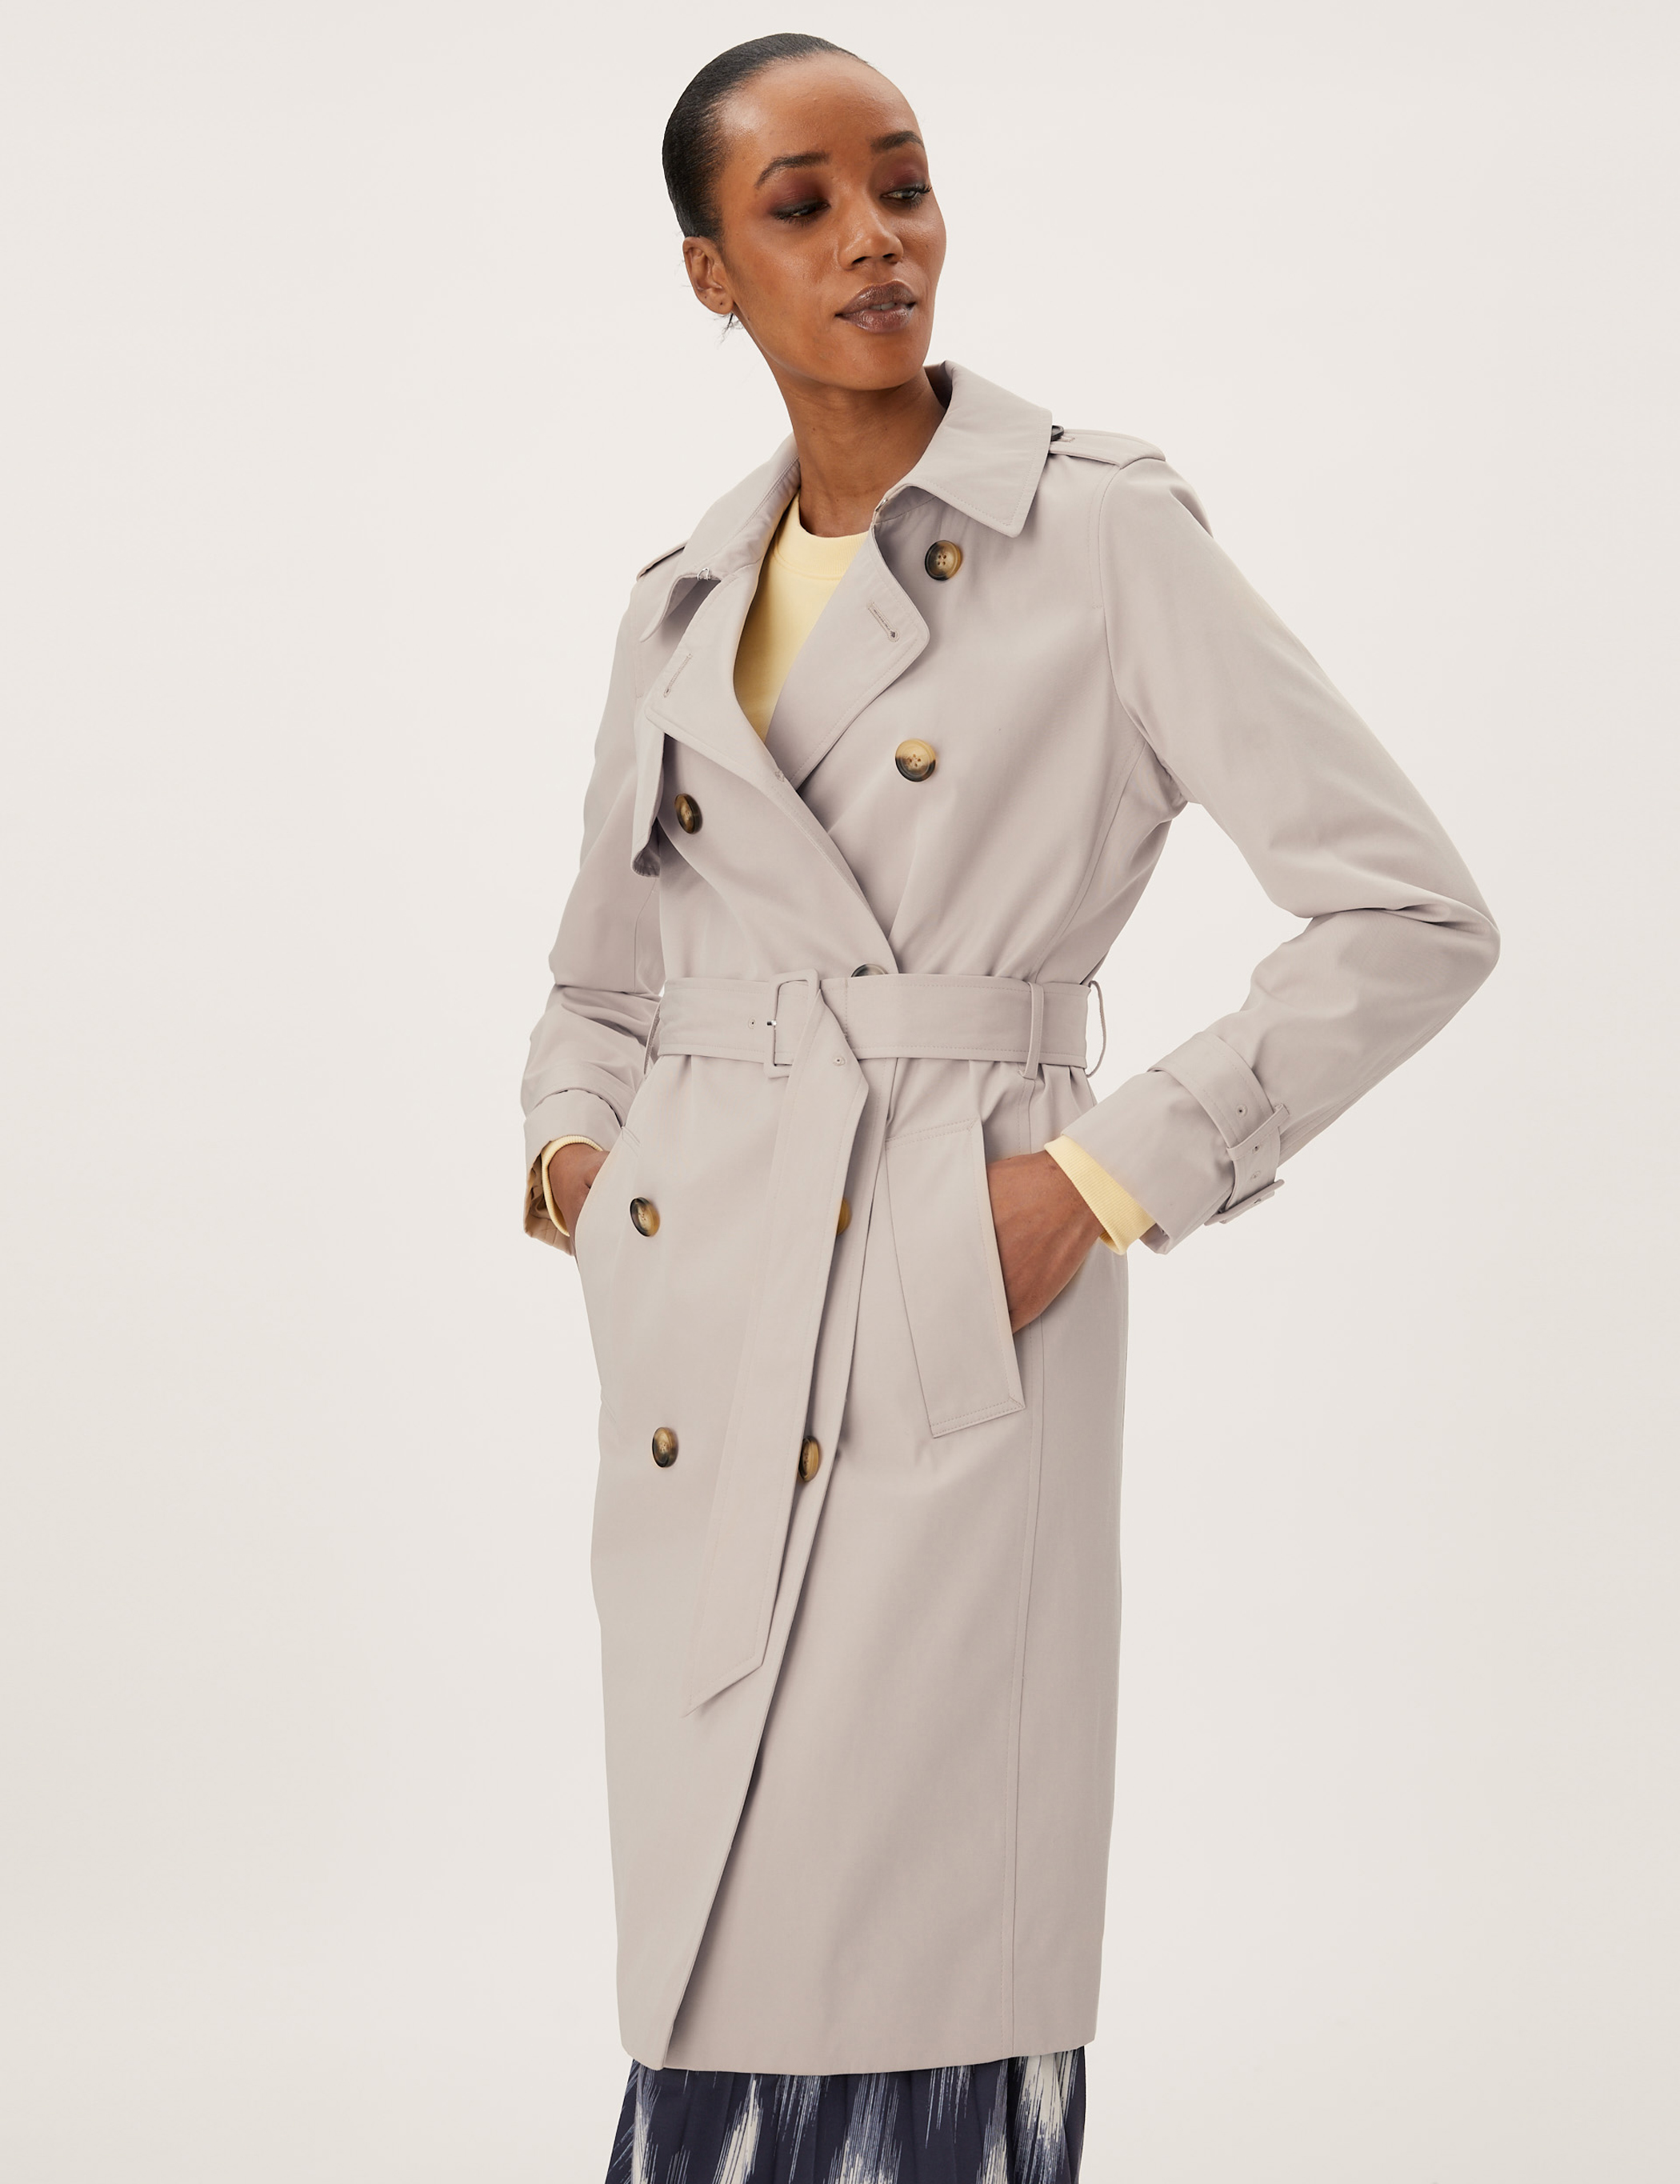 M&S Sand Essential Trench, available for rental from Hirestreet